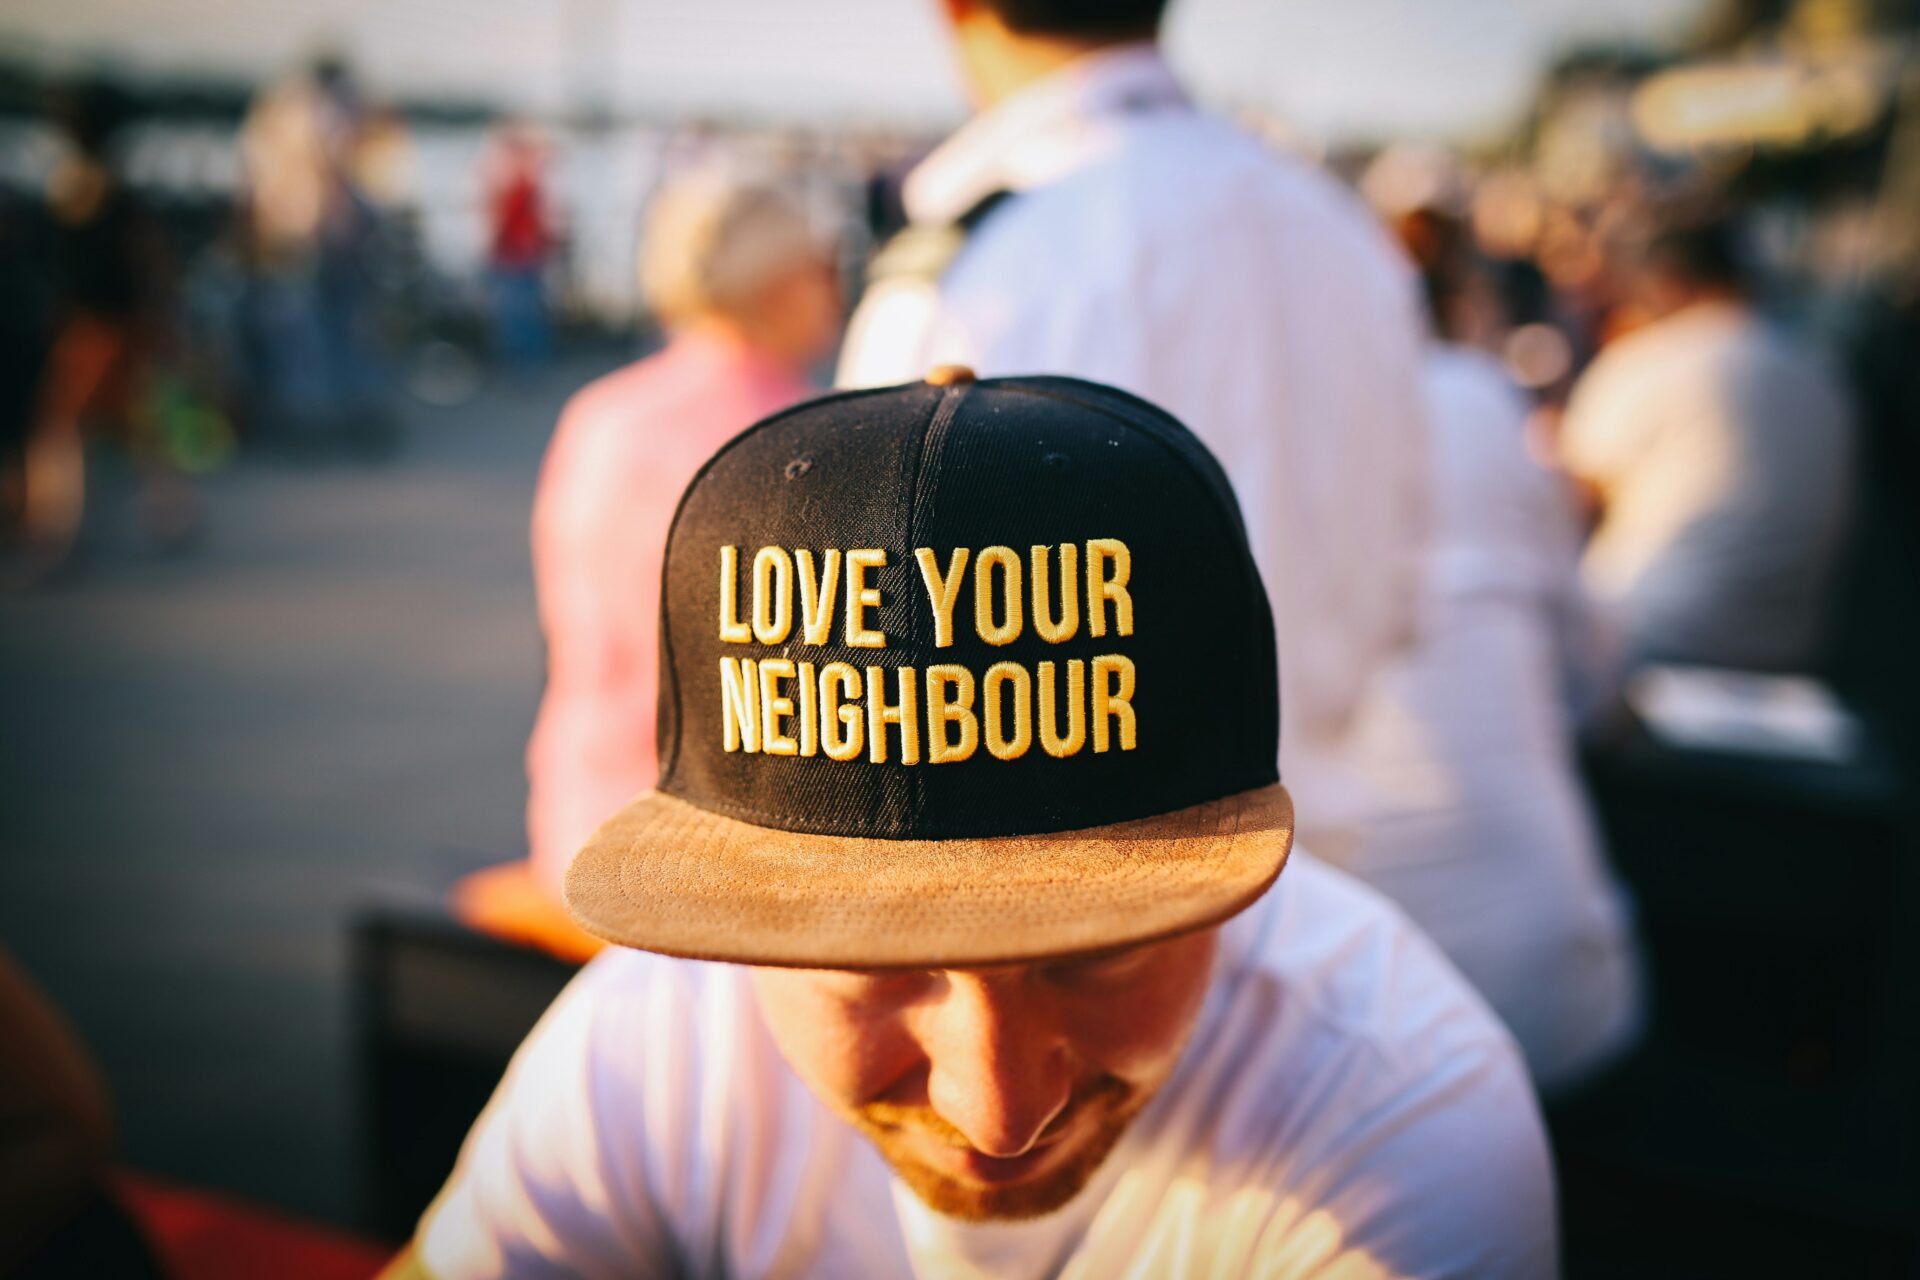 Person with a hat that reads "Love your neighbor"